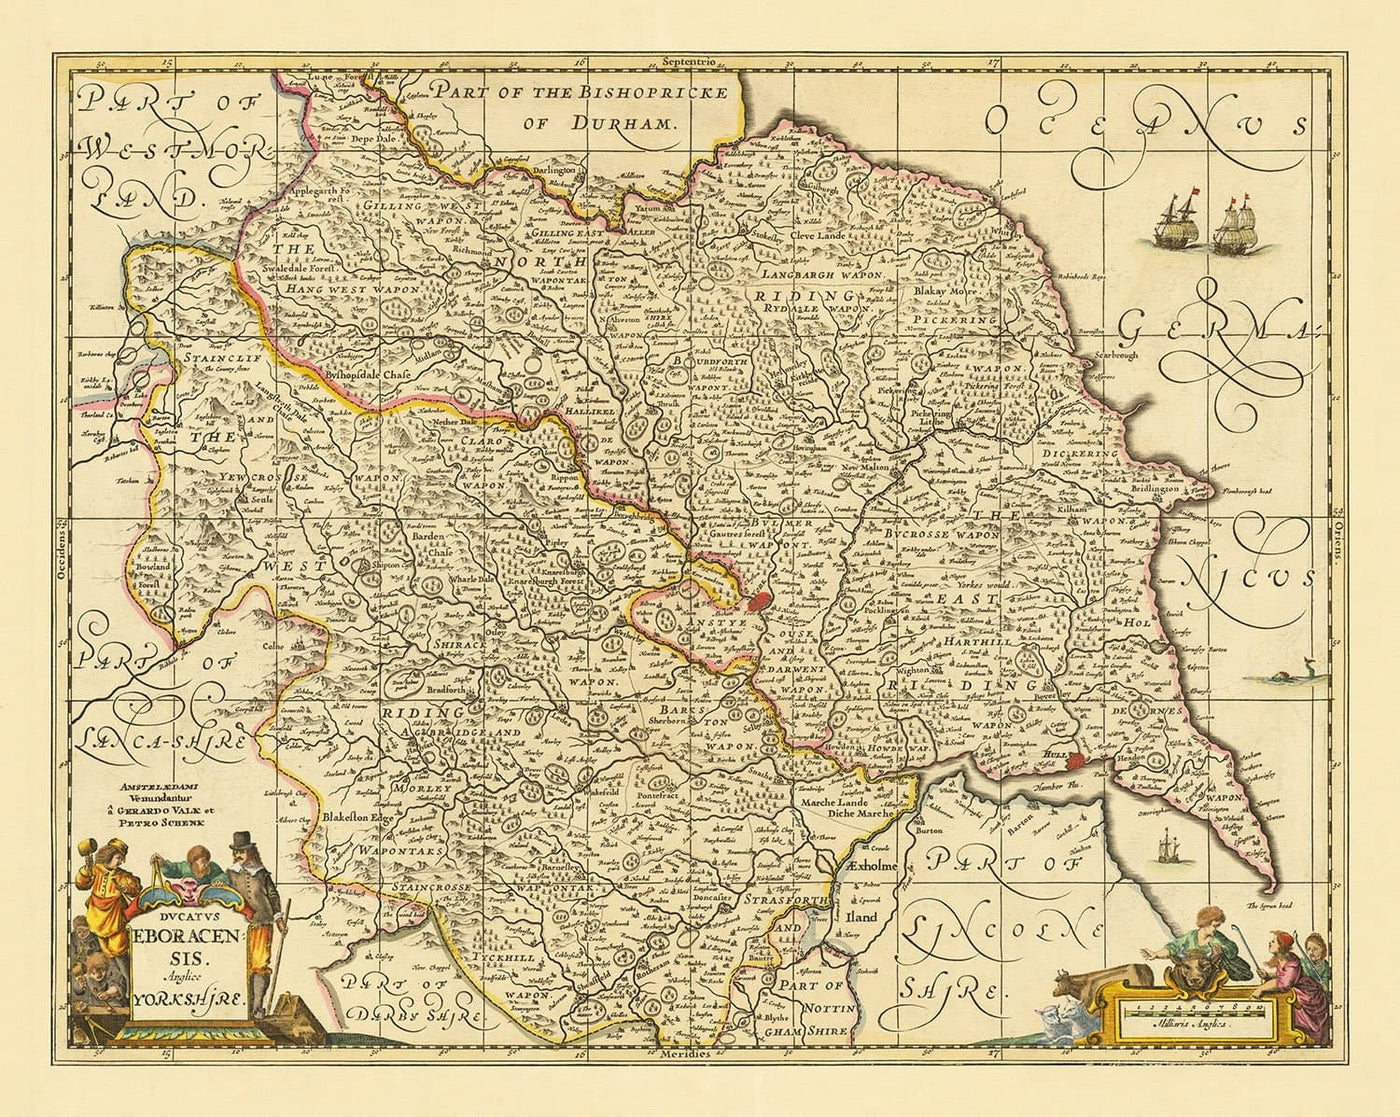 Mapa antiguo de Yorkshire, 1690 - York, Leeds, Sheffield, Rotherham, Doncaster, Middlesbrough, Hull, Whitby, Humber